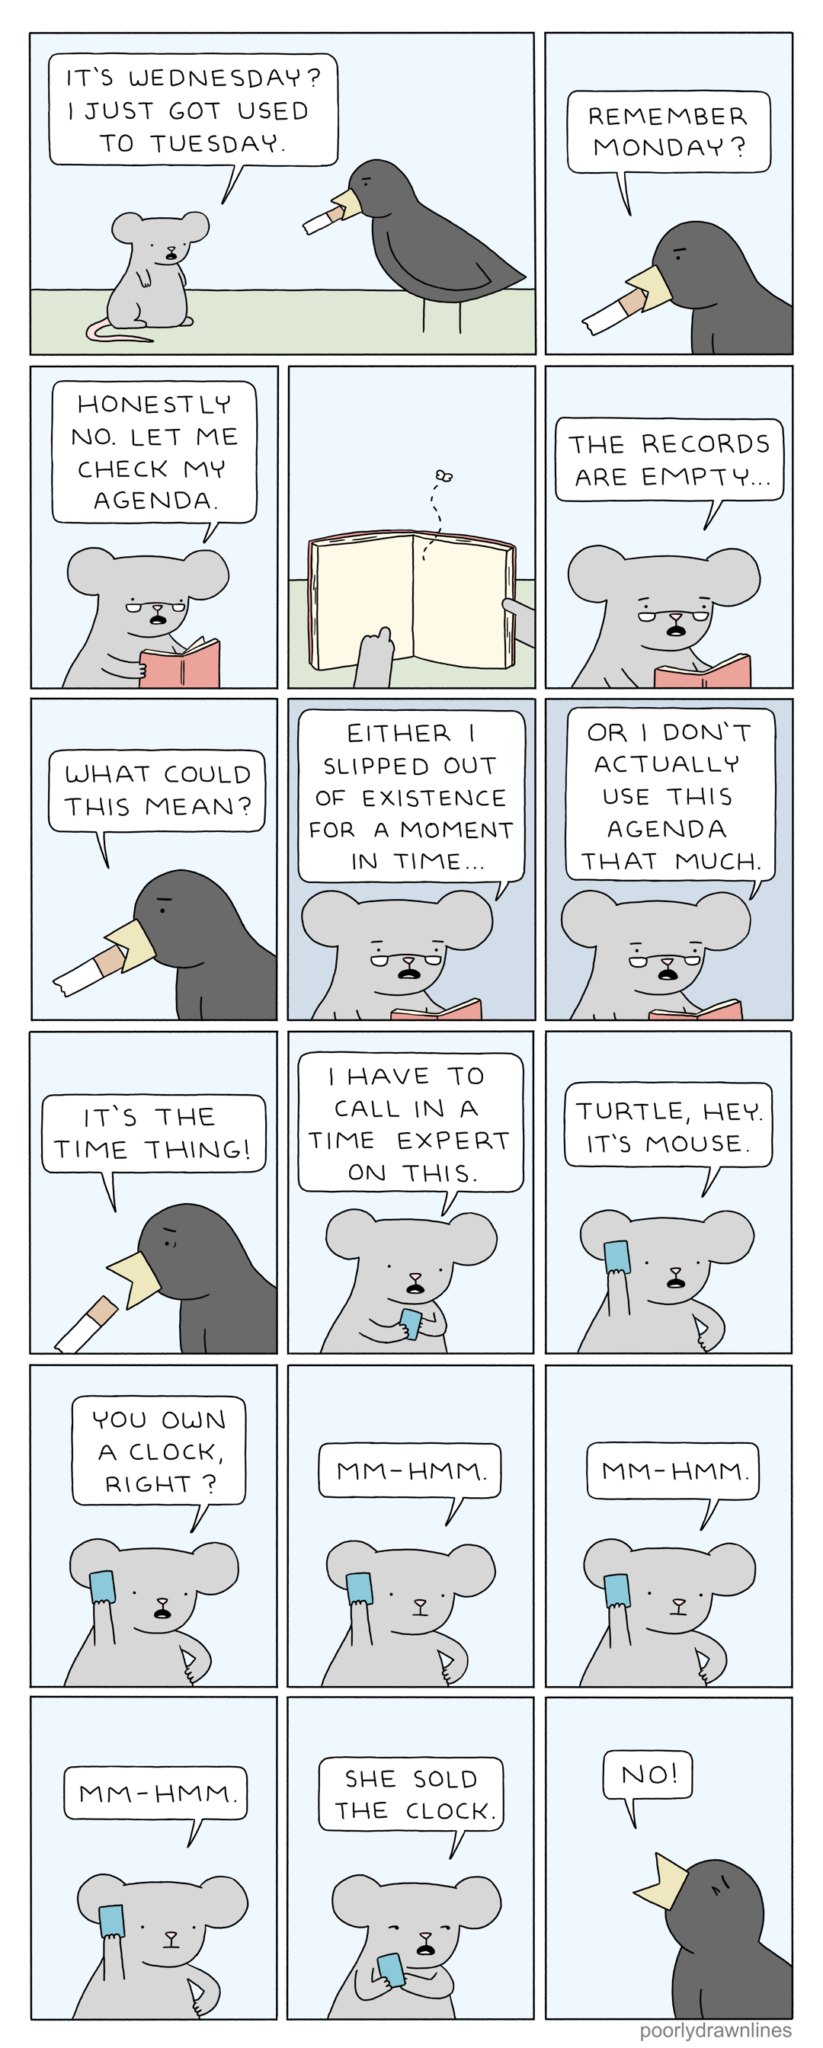 Poorly Drawn Lines – Wednesday